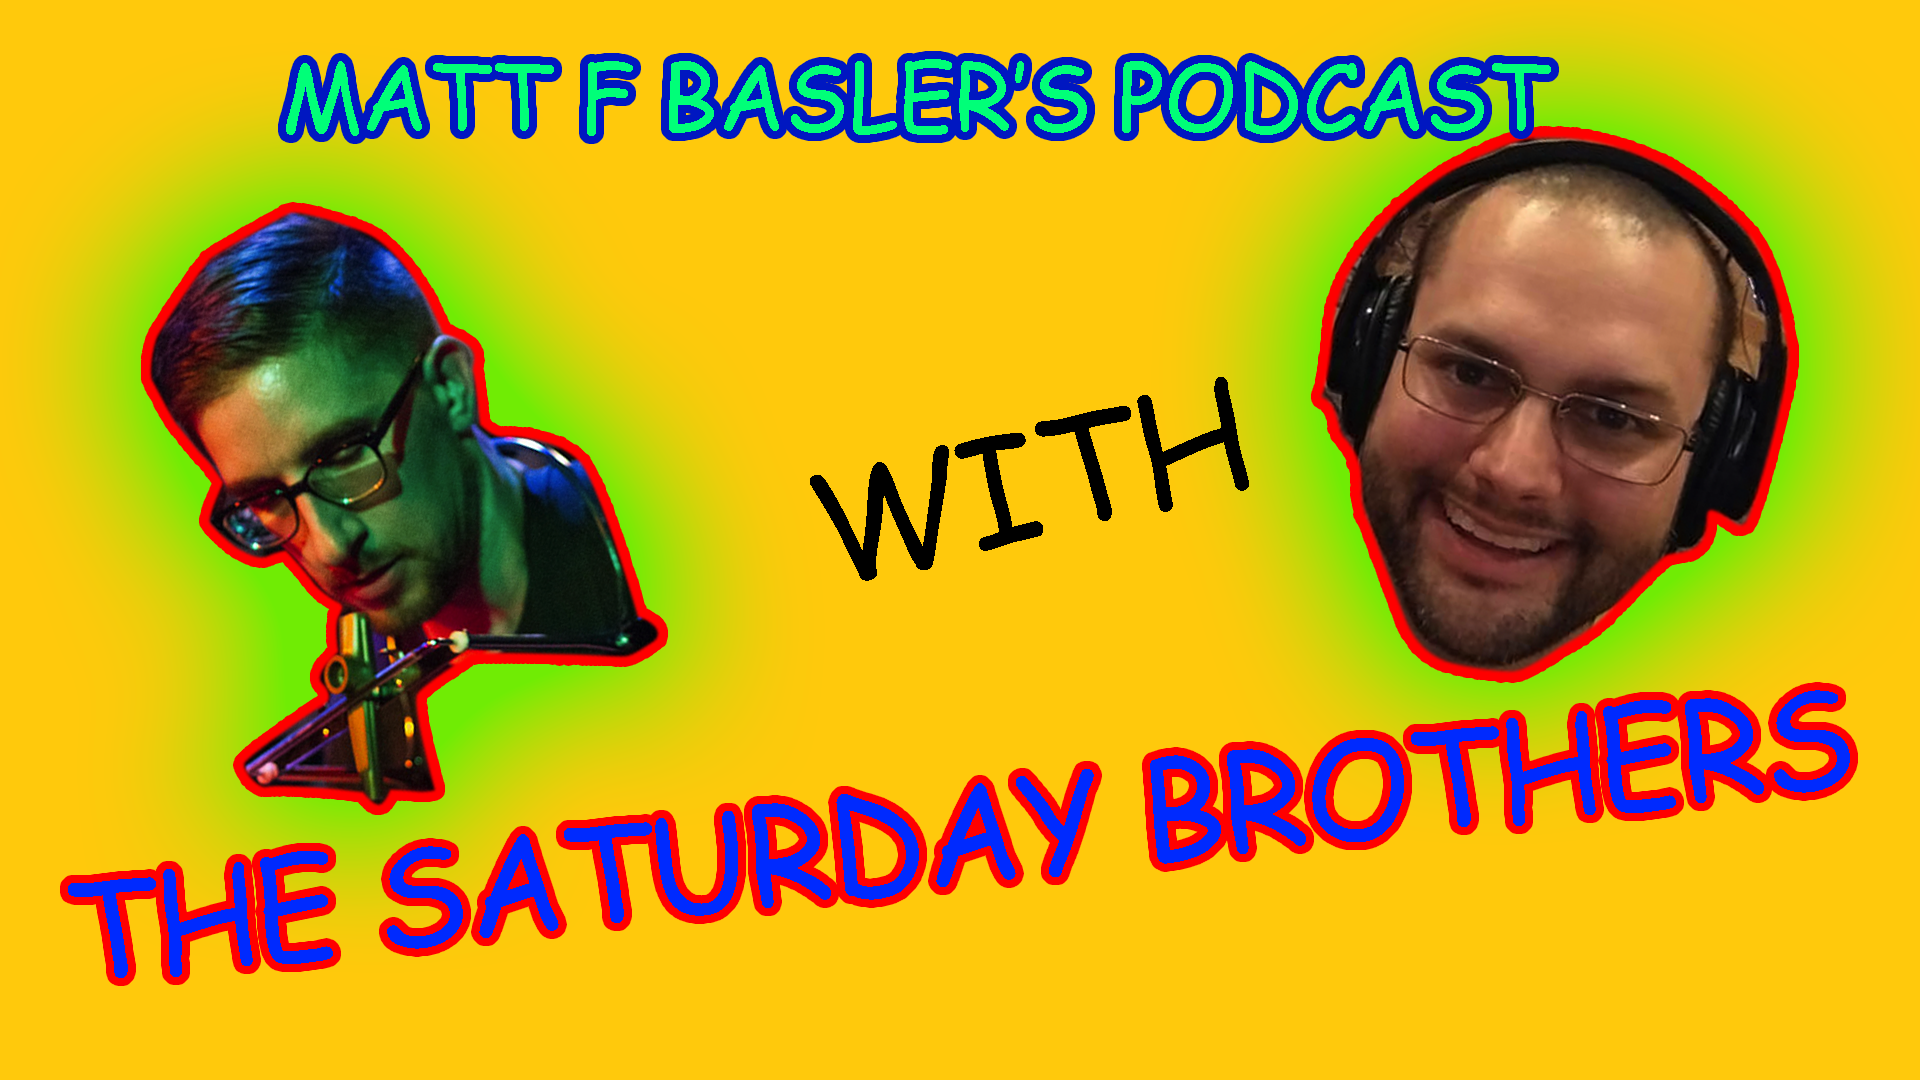 46 - The Saturday Brothers